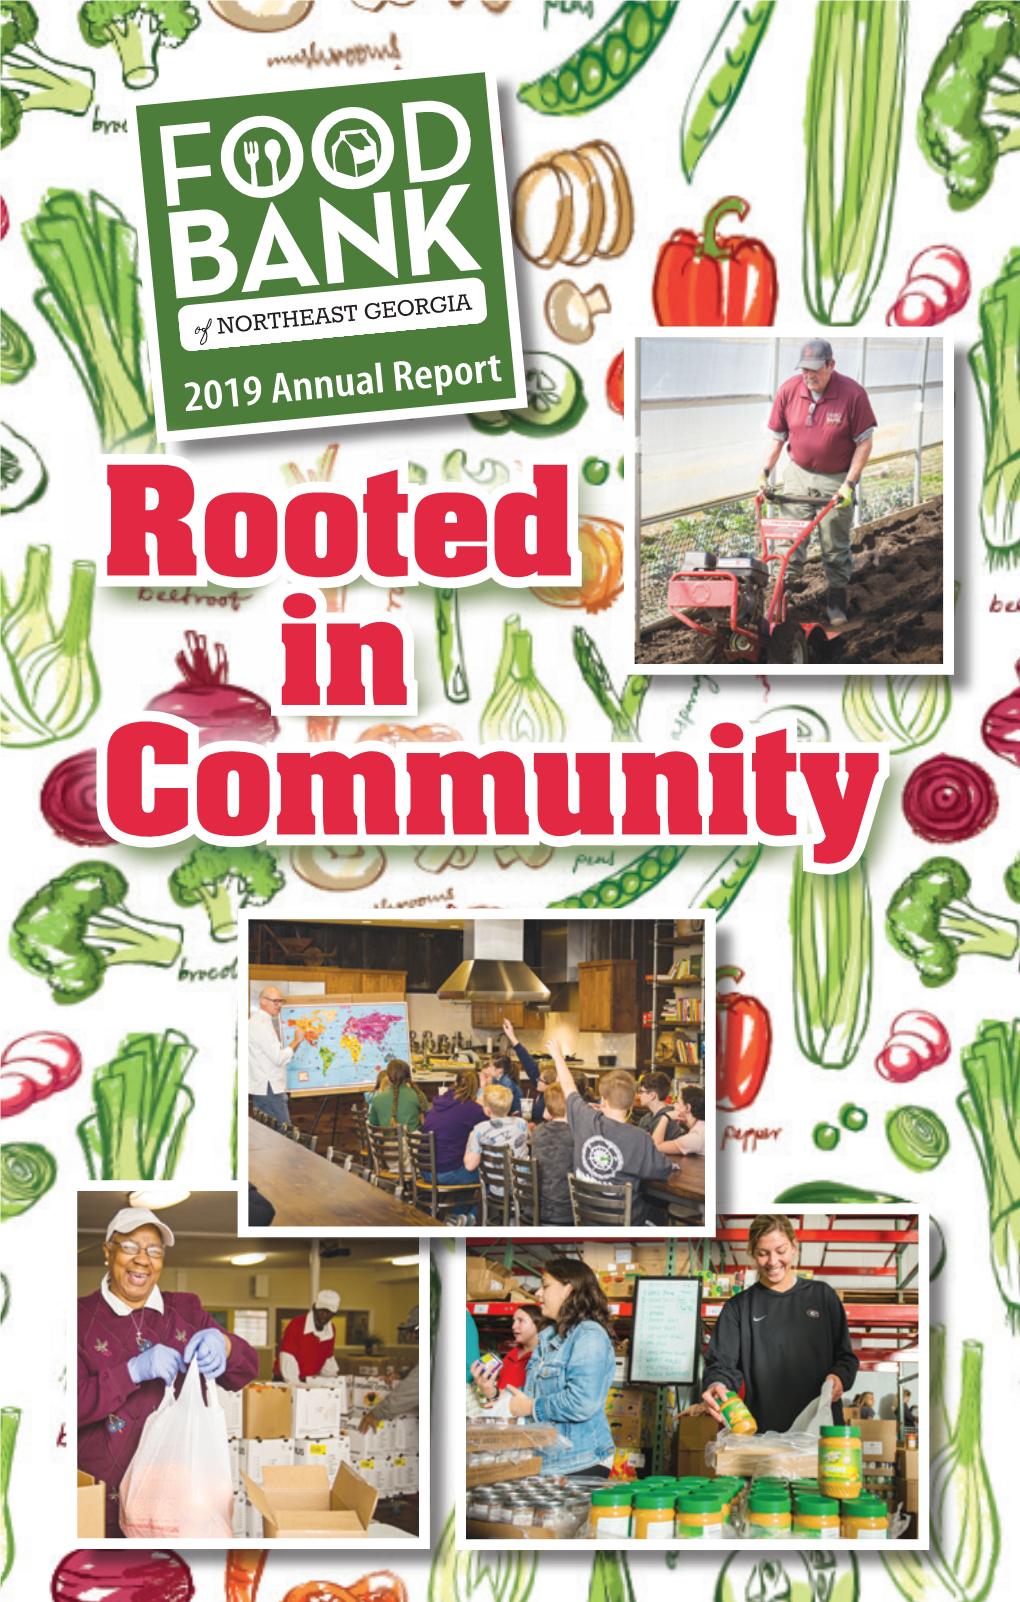 Rooted in Community Board of Directors